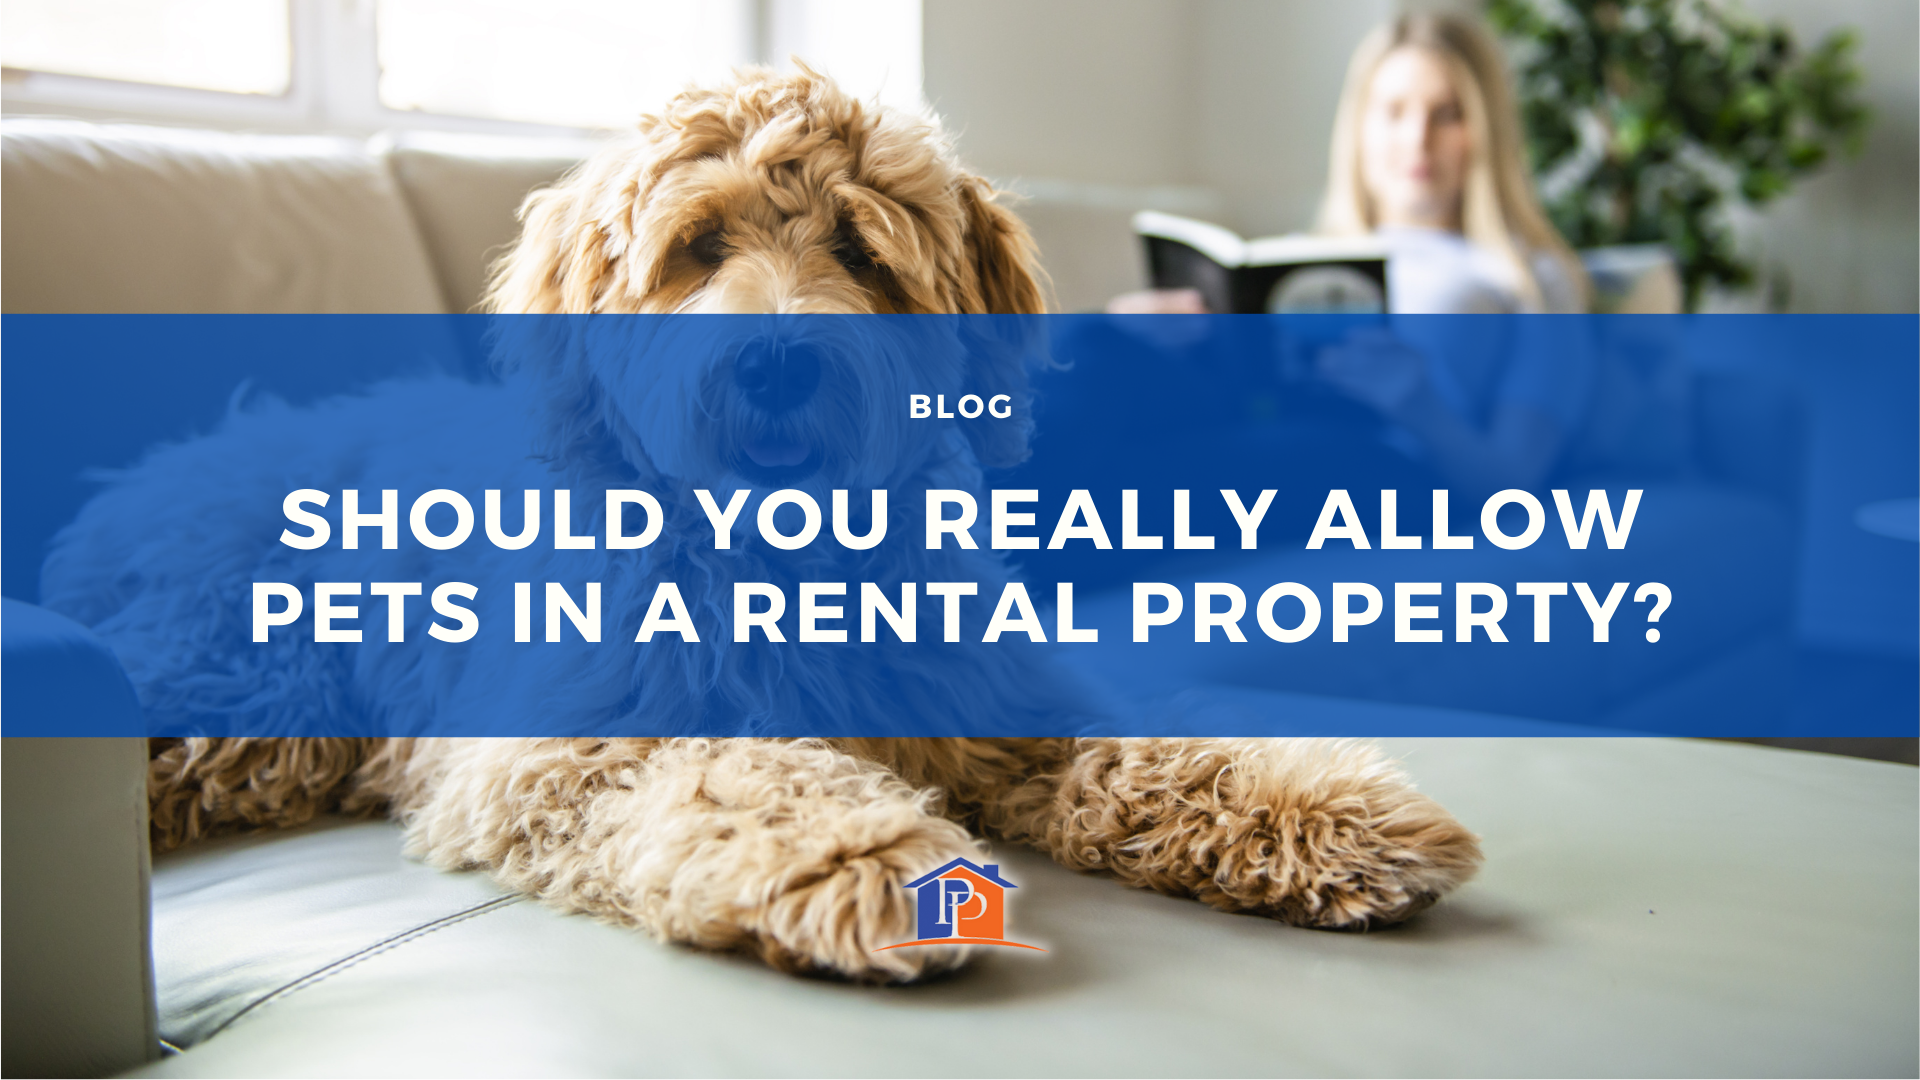 Should You Really Allow Pets in a Rental Property?